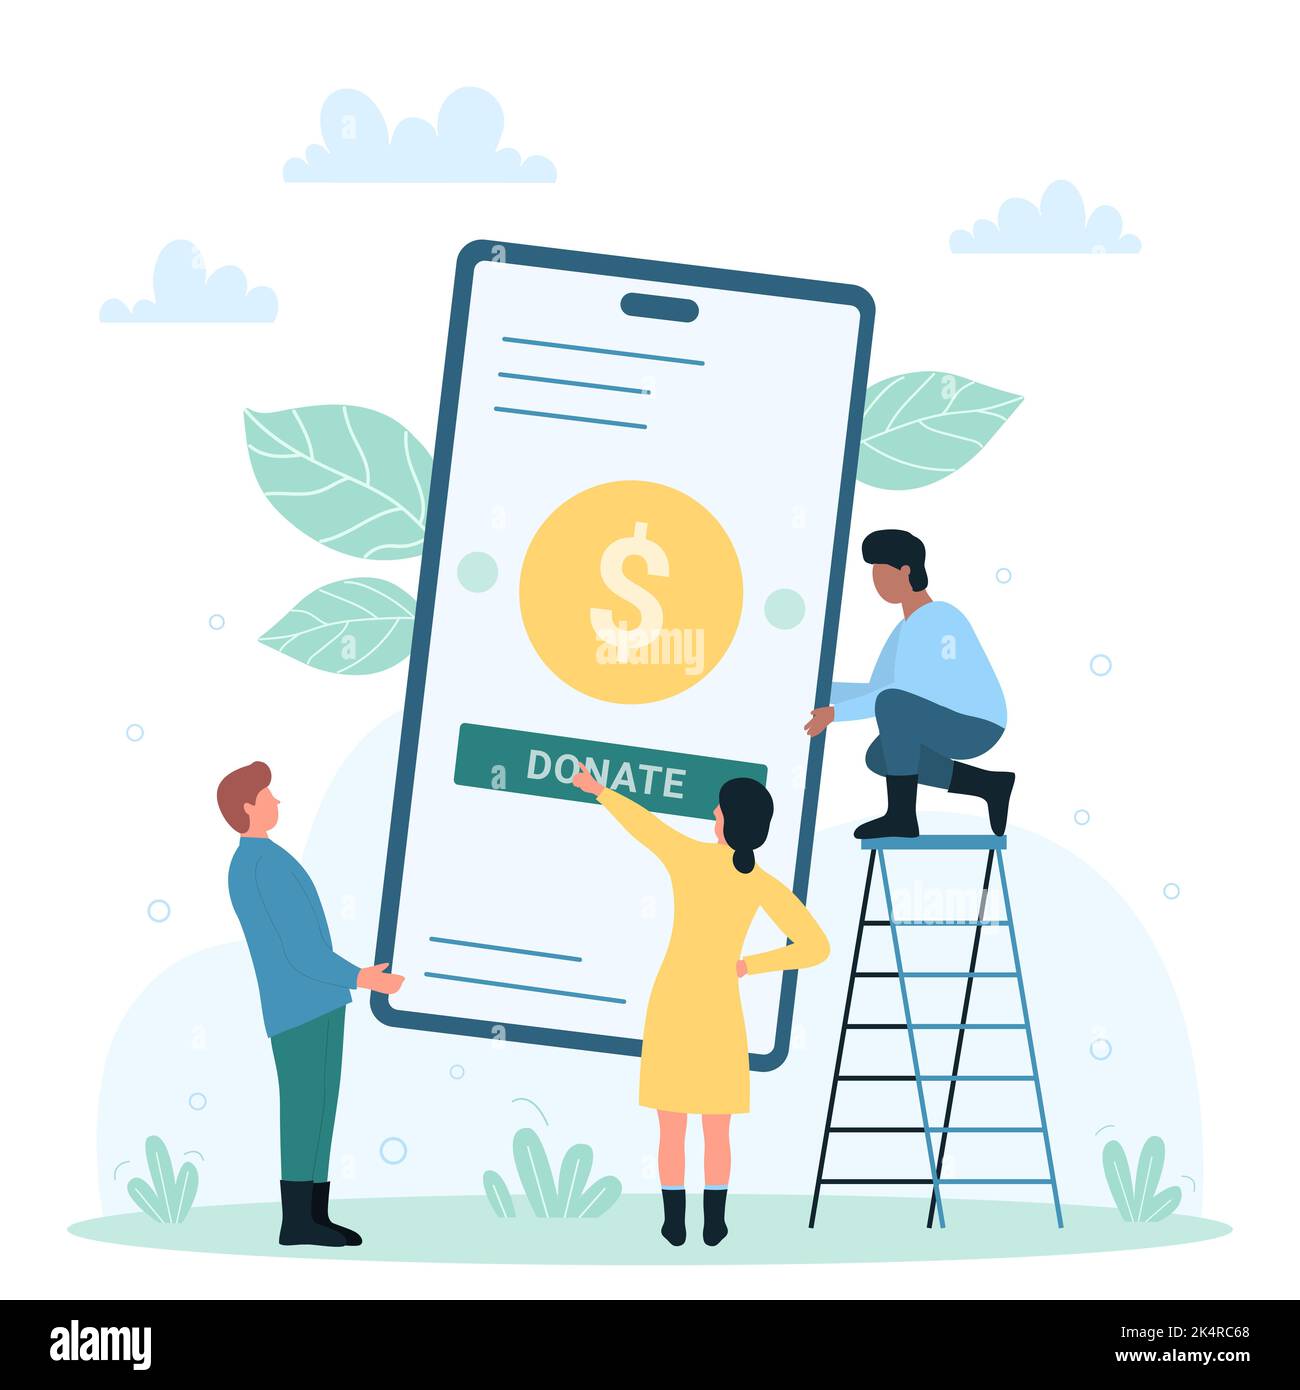 Online charity, donation mobile app with donate button vector illustration. Cartoon tiny volunteers donate money, fast fundraising for humanitarian aid and help, application of nonprofit fund Stock Vector